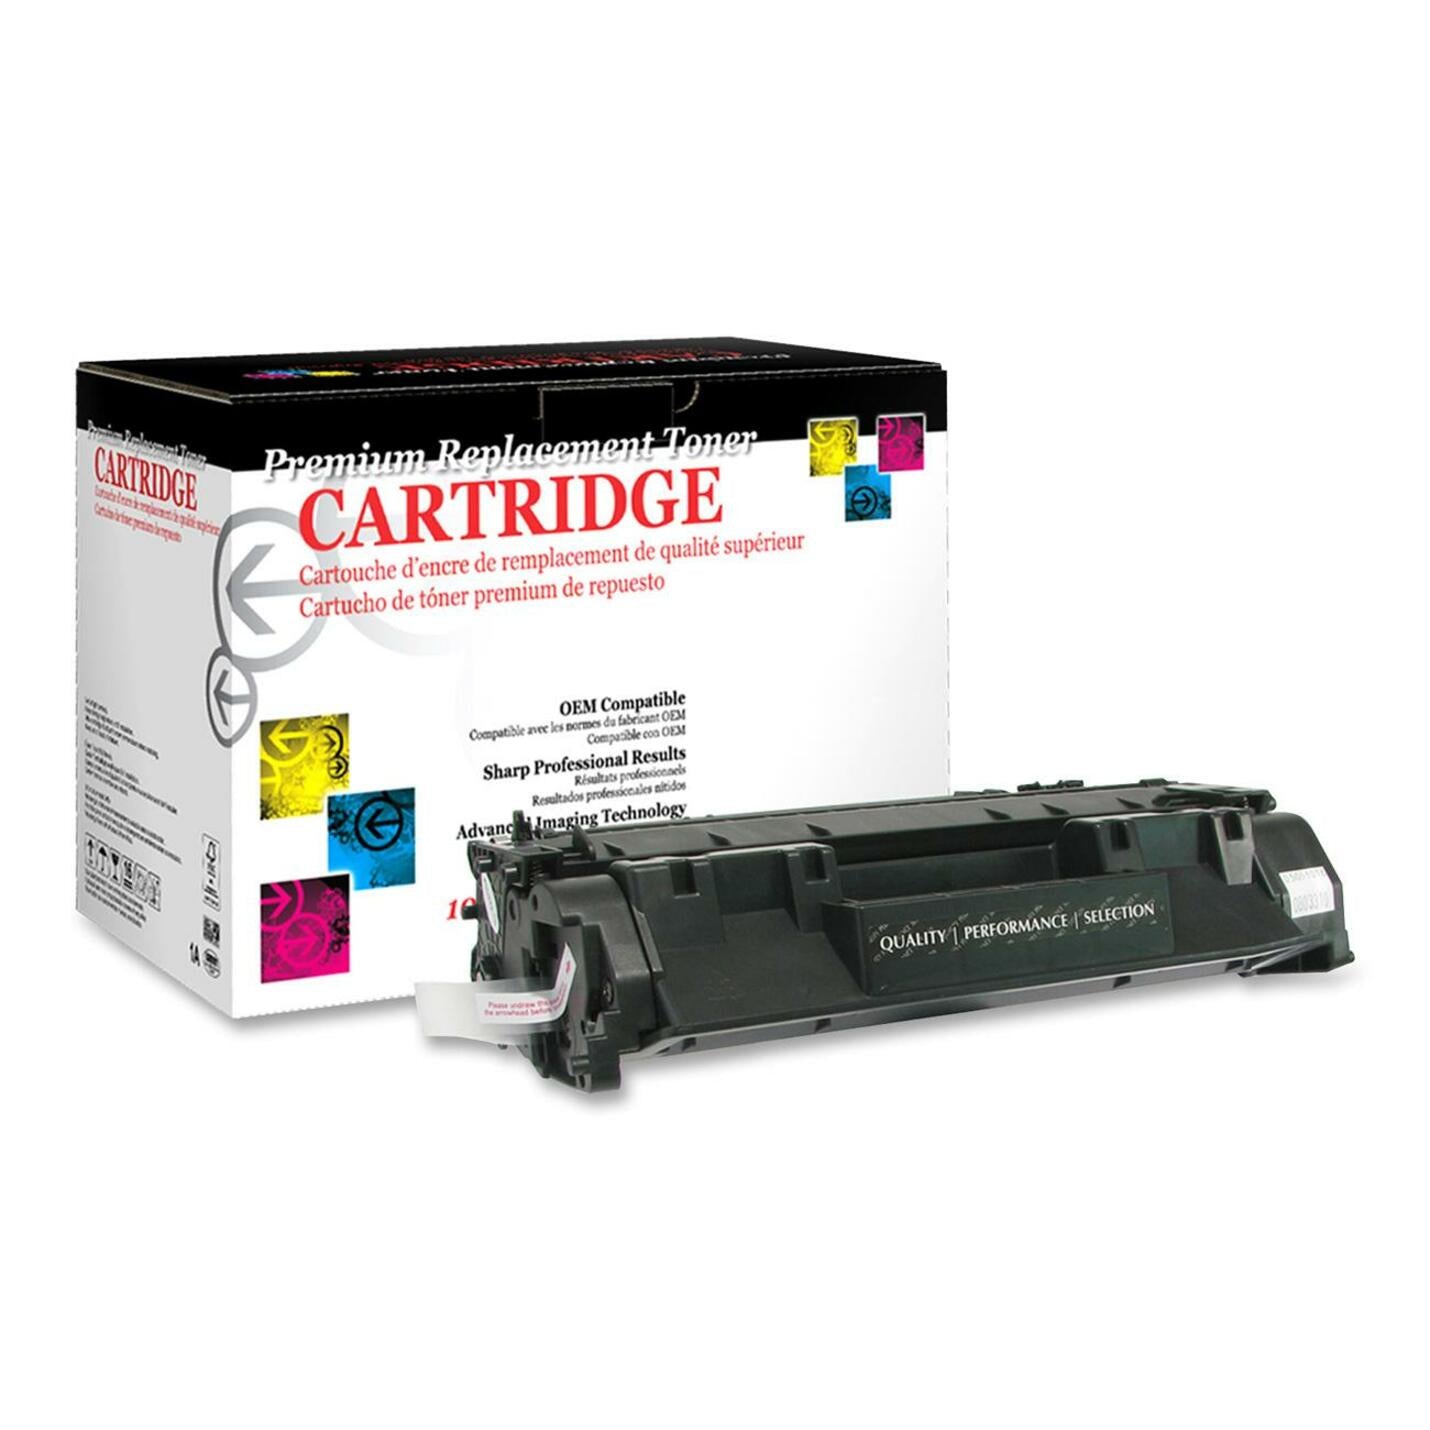 West Point 200173P Remanufactured Toner Cartridge Alternative For HP 05A (CE505A), 2300 Page Yield, Black